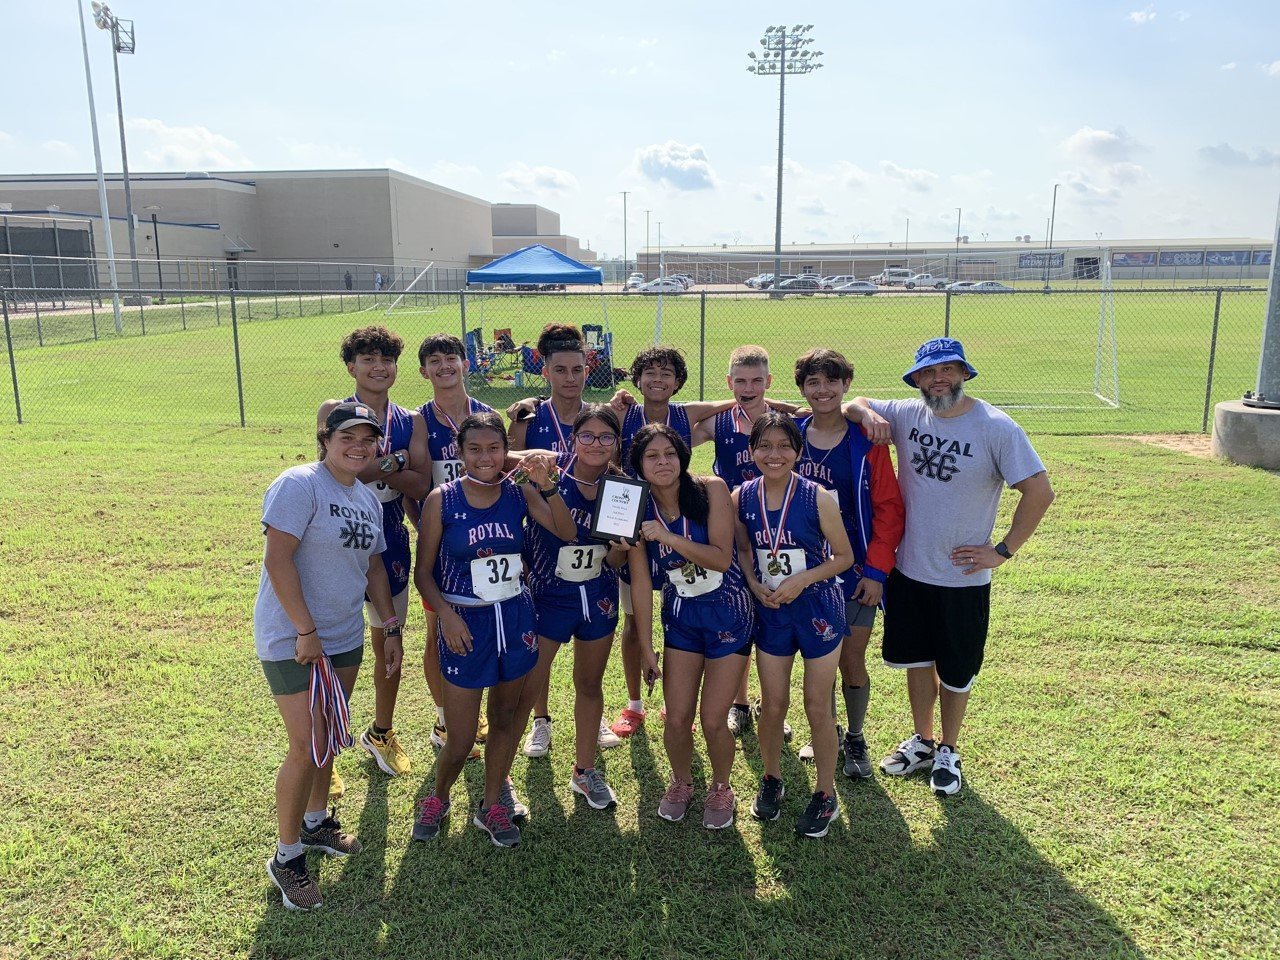 Royal ISD hosted its Invitational Cross Country Meet Sept. 9